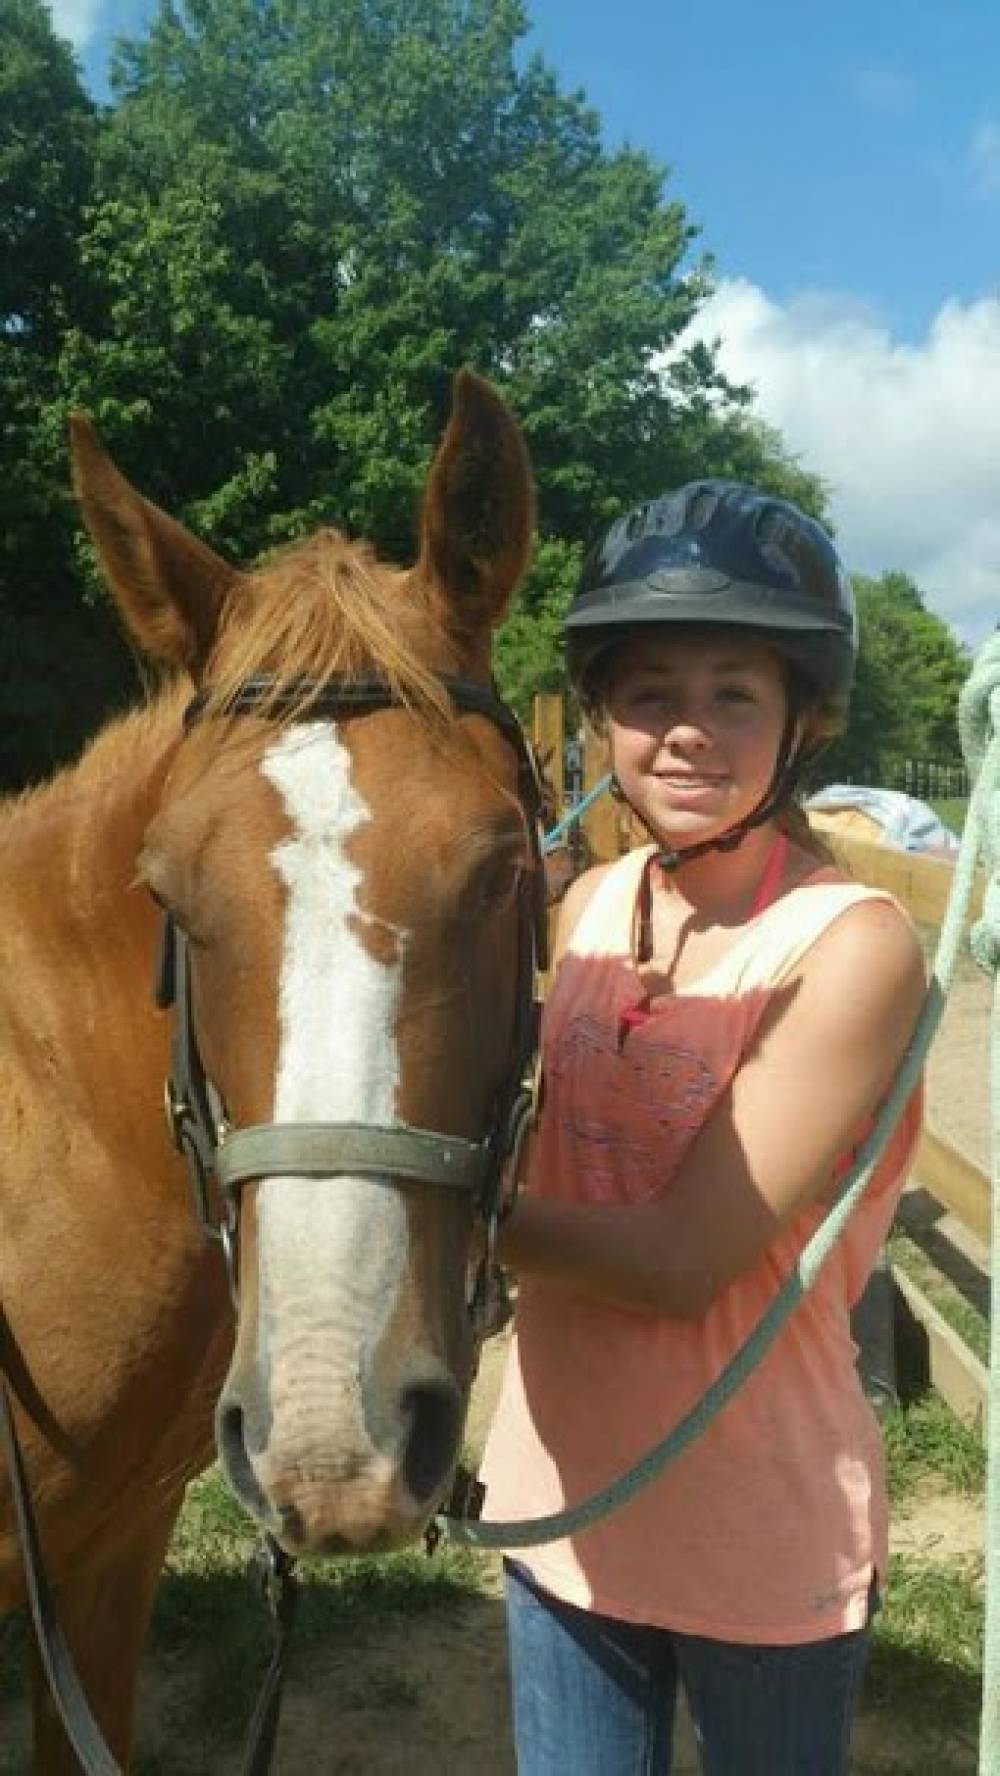 TOP GEORGIA HORSE RIDING CAMP: Camp Woodmont is a Top Horse Riding Summer Camp located in Cloudland Georgia offering many fun and enriching Horse Riding and other camp programs. Camp Woodmont also offers CIT/LIT and/or Teen Leadership Opportunities, too.